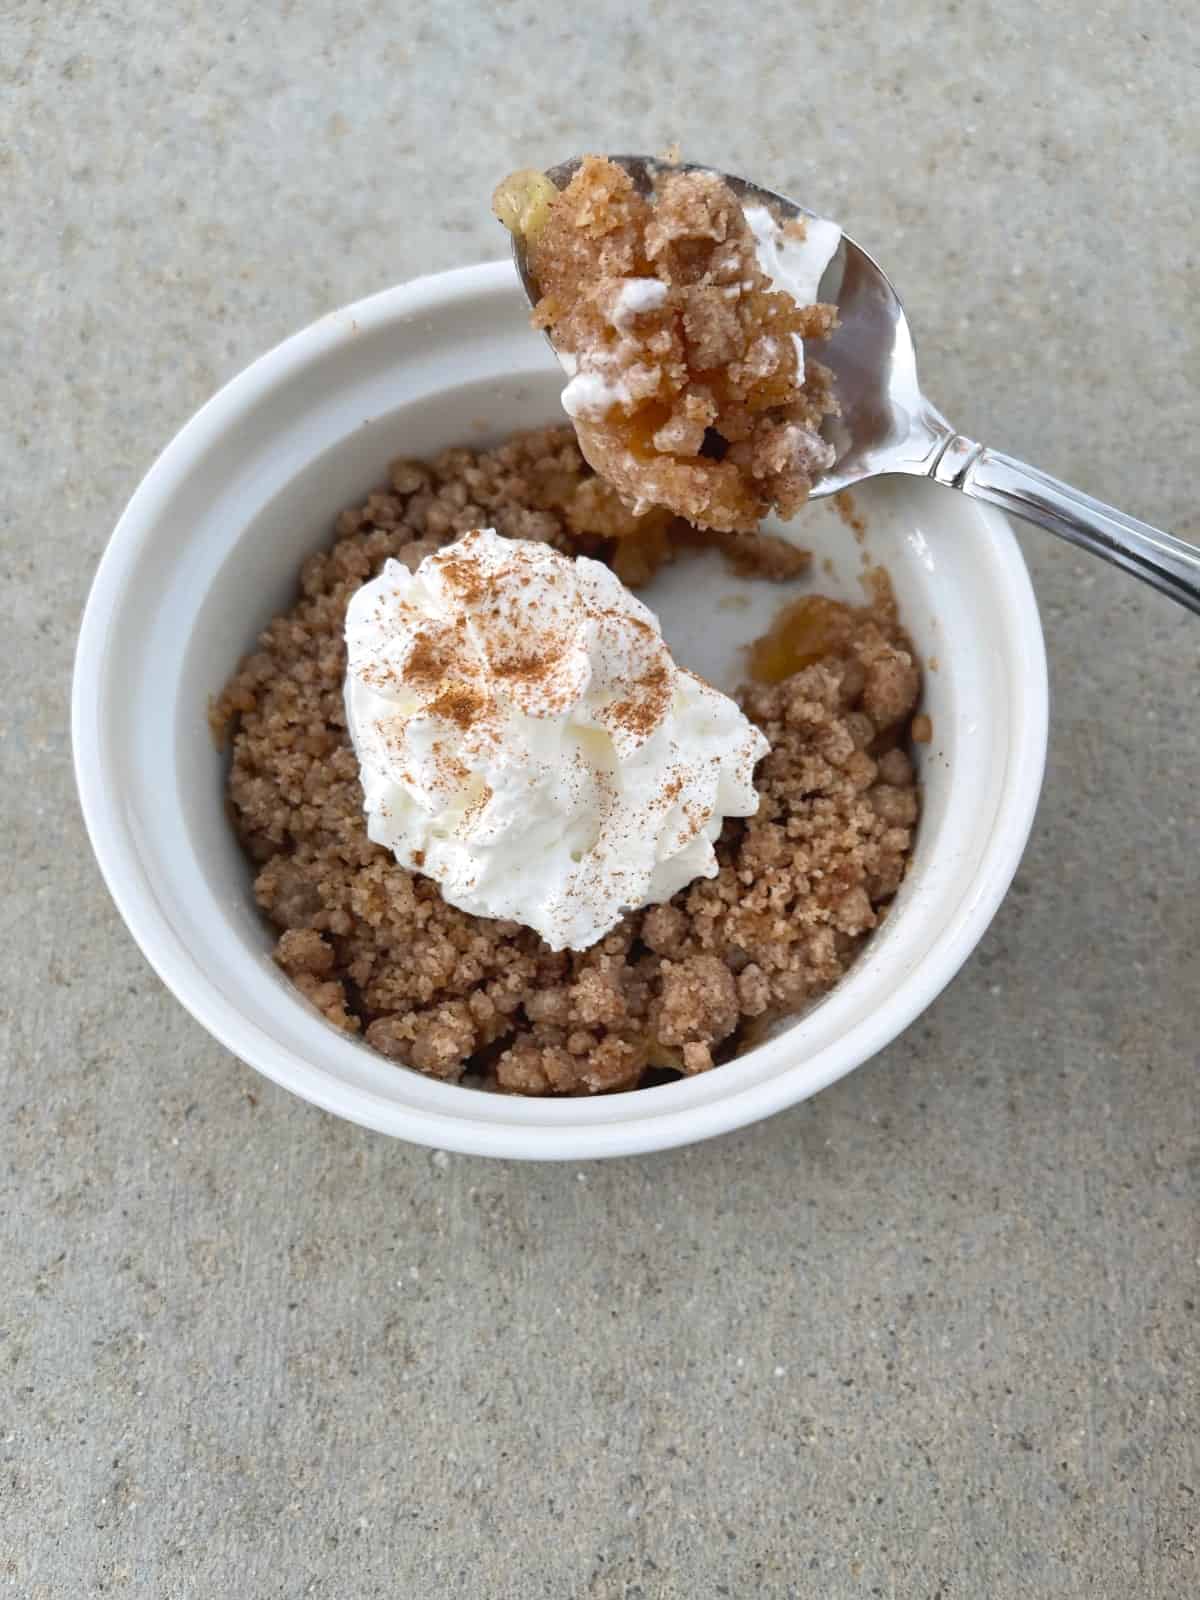 Microwave apple crisp topped with whipped topping and cinnamon with spoon.